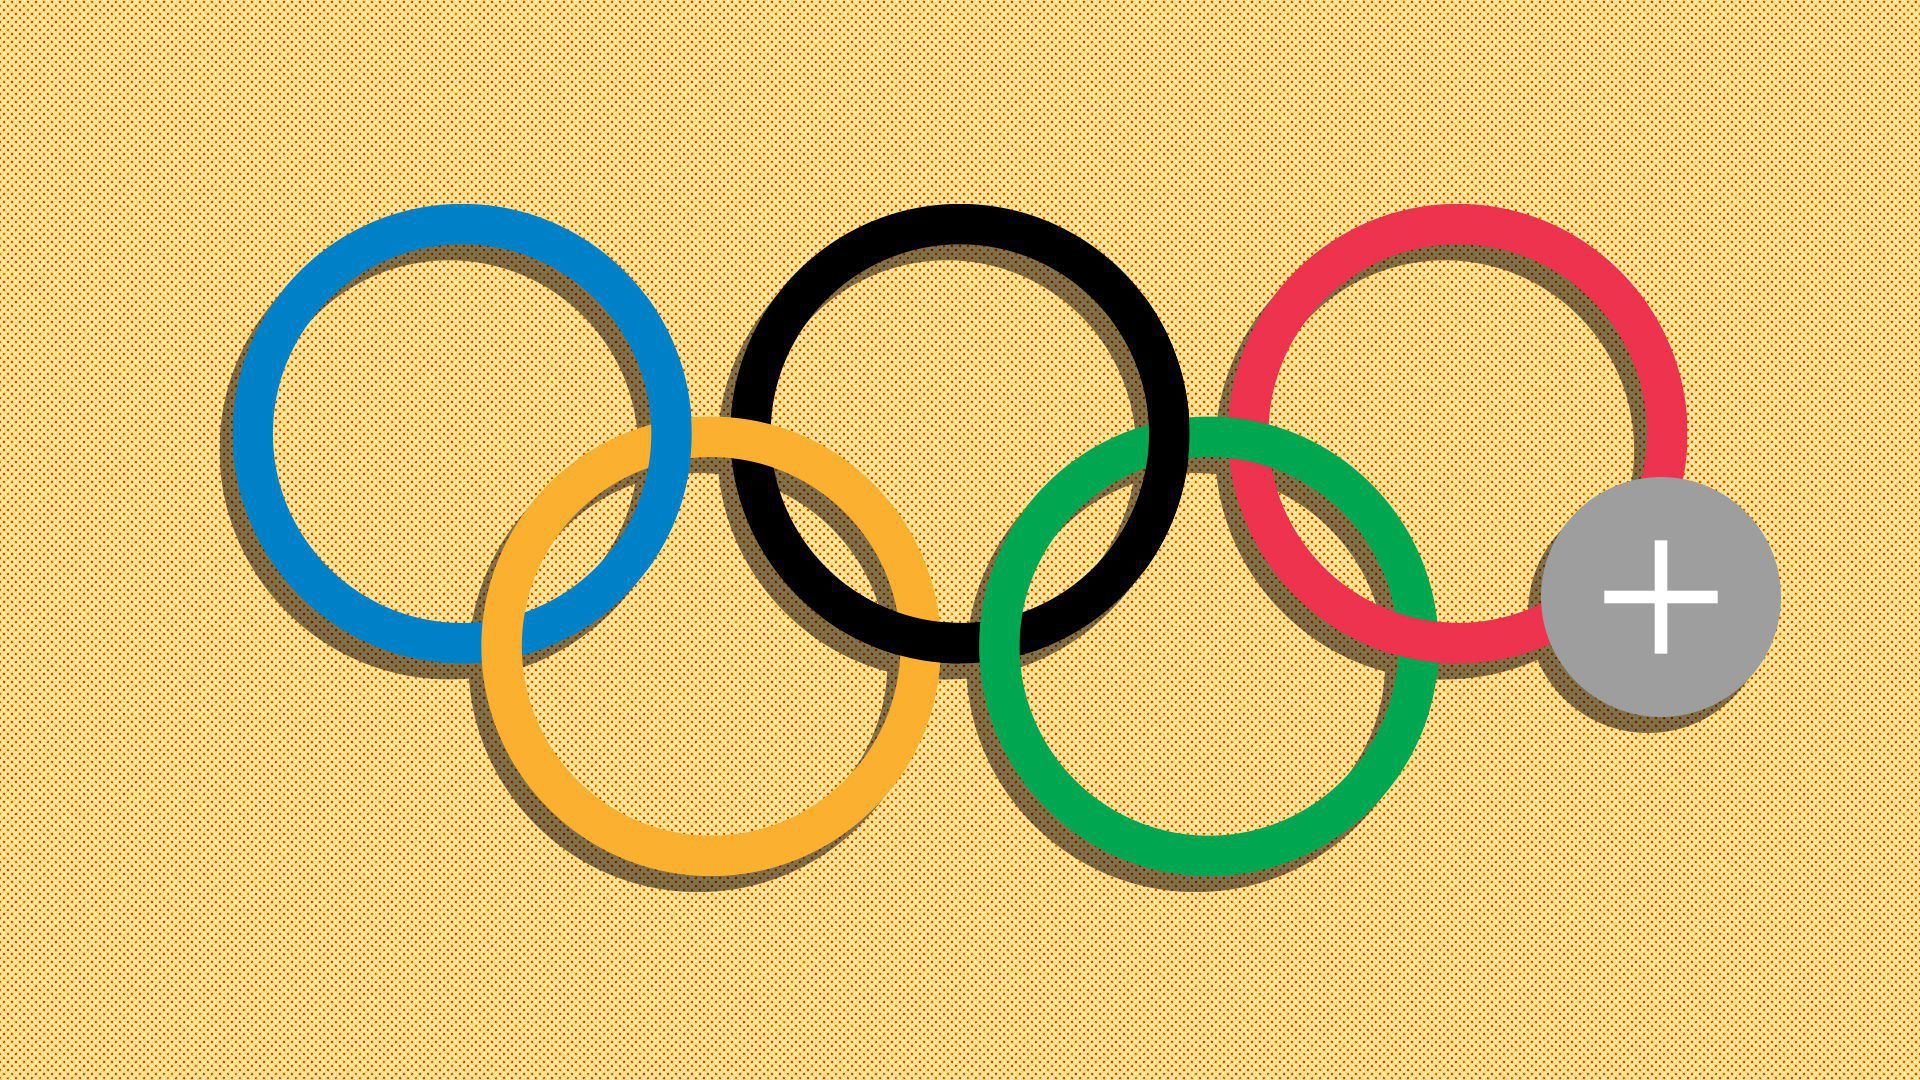 Olympics logo with icon to add ring